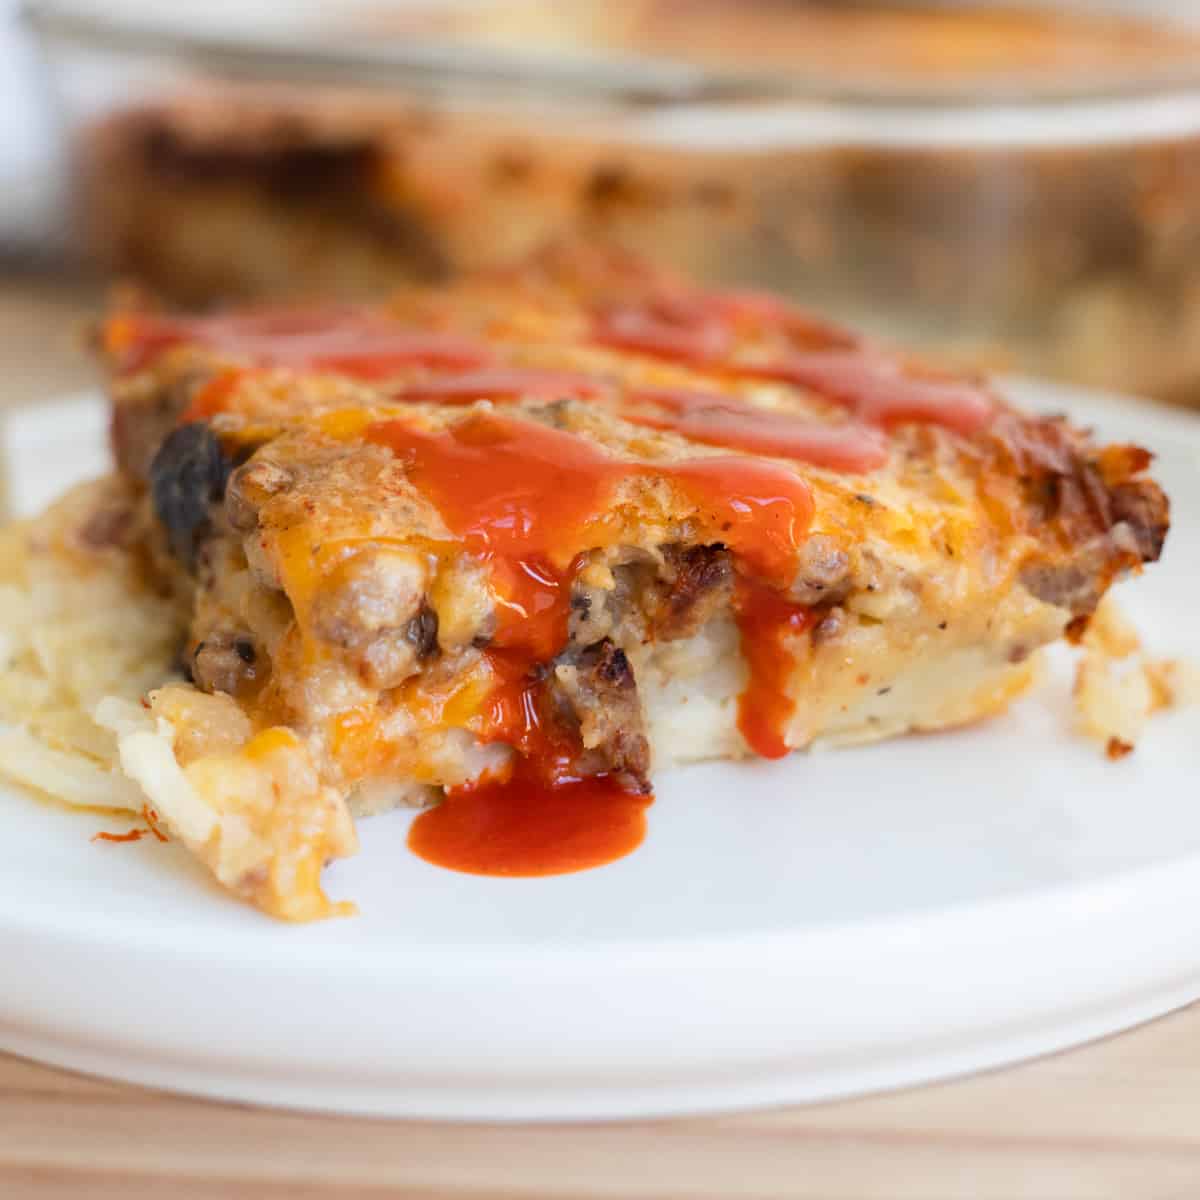 A piece of egg and sausage gravy breakfast casserole with hot sauce dripped on it.